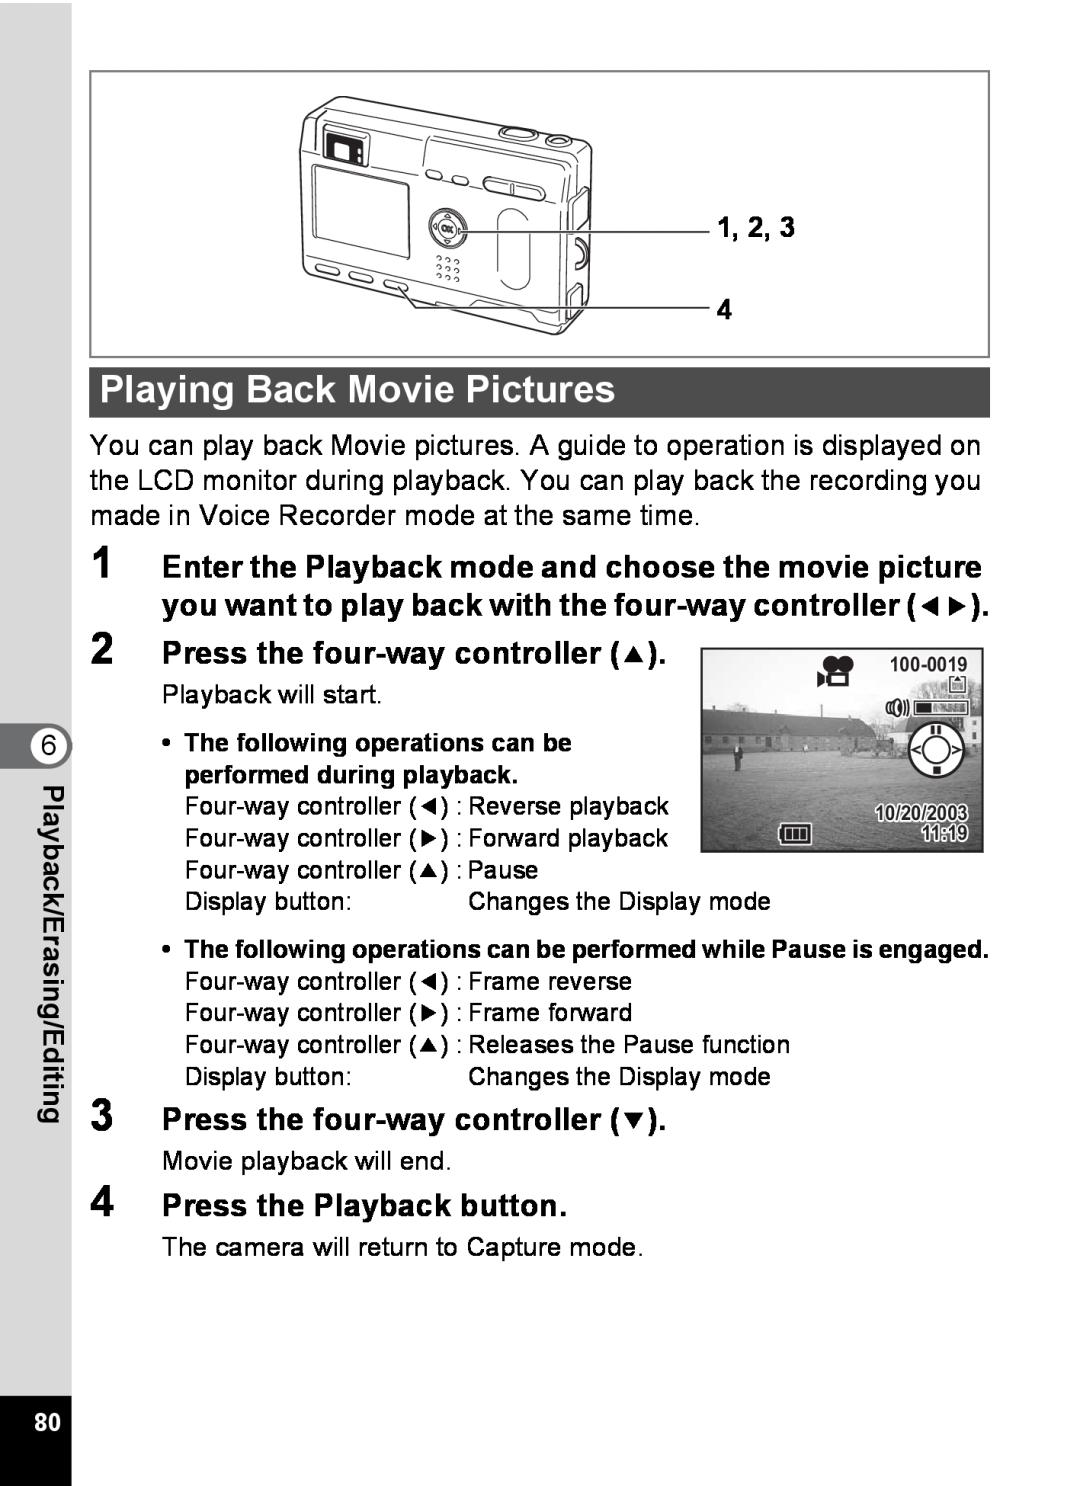 Pentax S4 manual Playing Back Movie Pictures, Press the Playback button, The following operations can be, 1, 2 